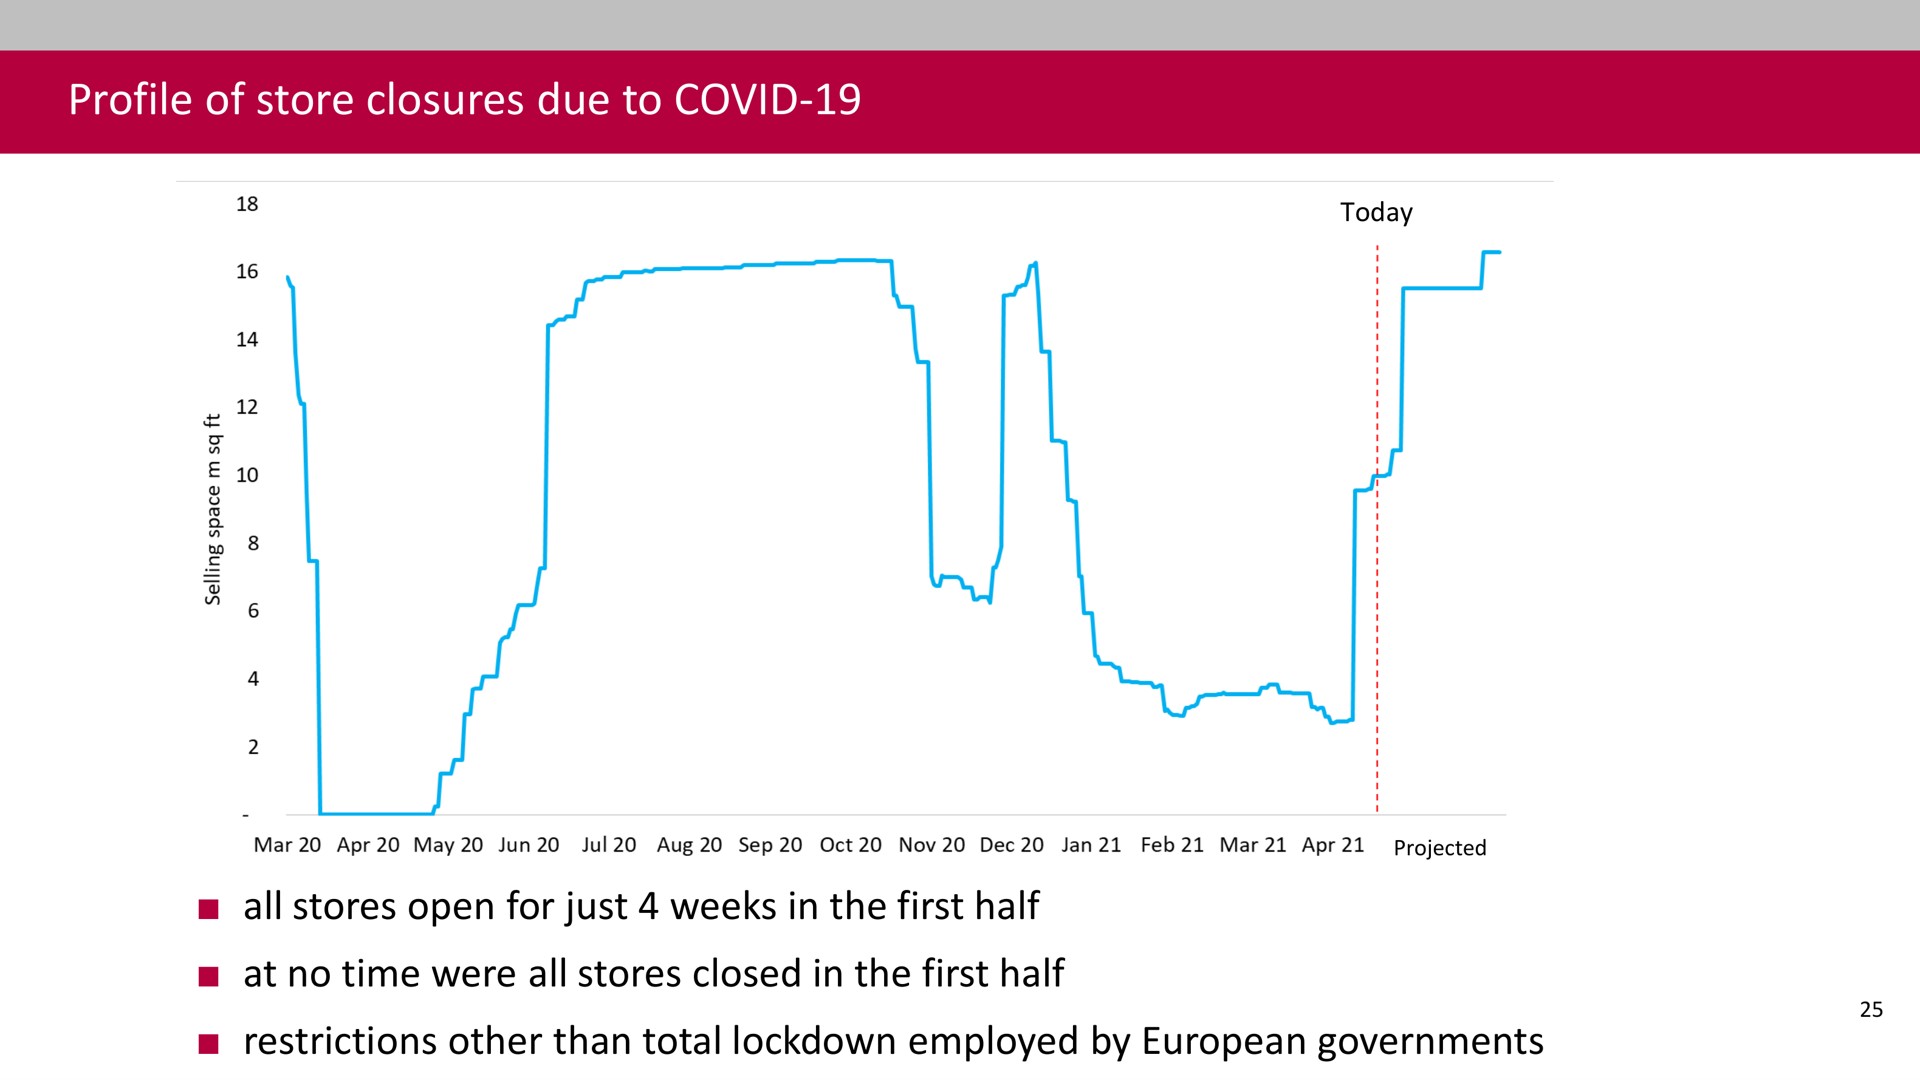 profile of store closures due to covid all stores open for just weeks in the first half at no time were all stores closed in the first half restrictions other than total employed by governments | Associated British Foods